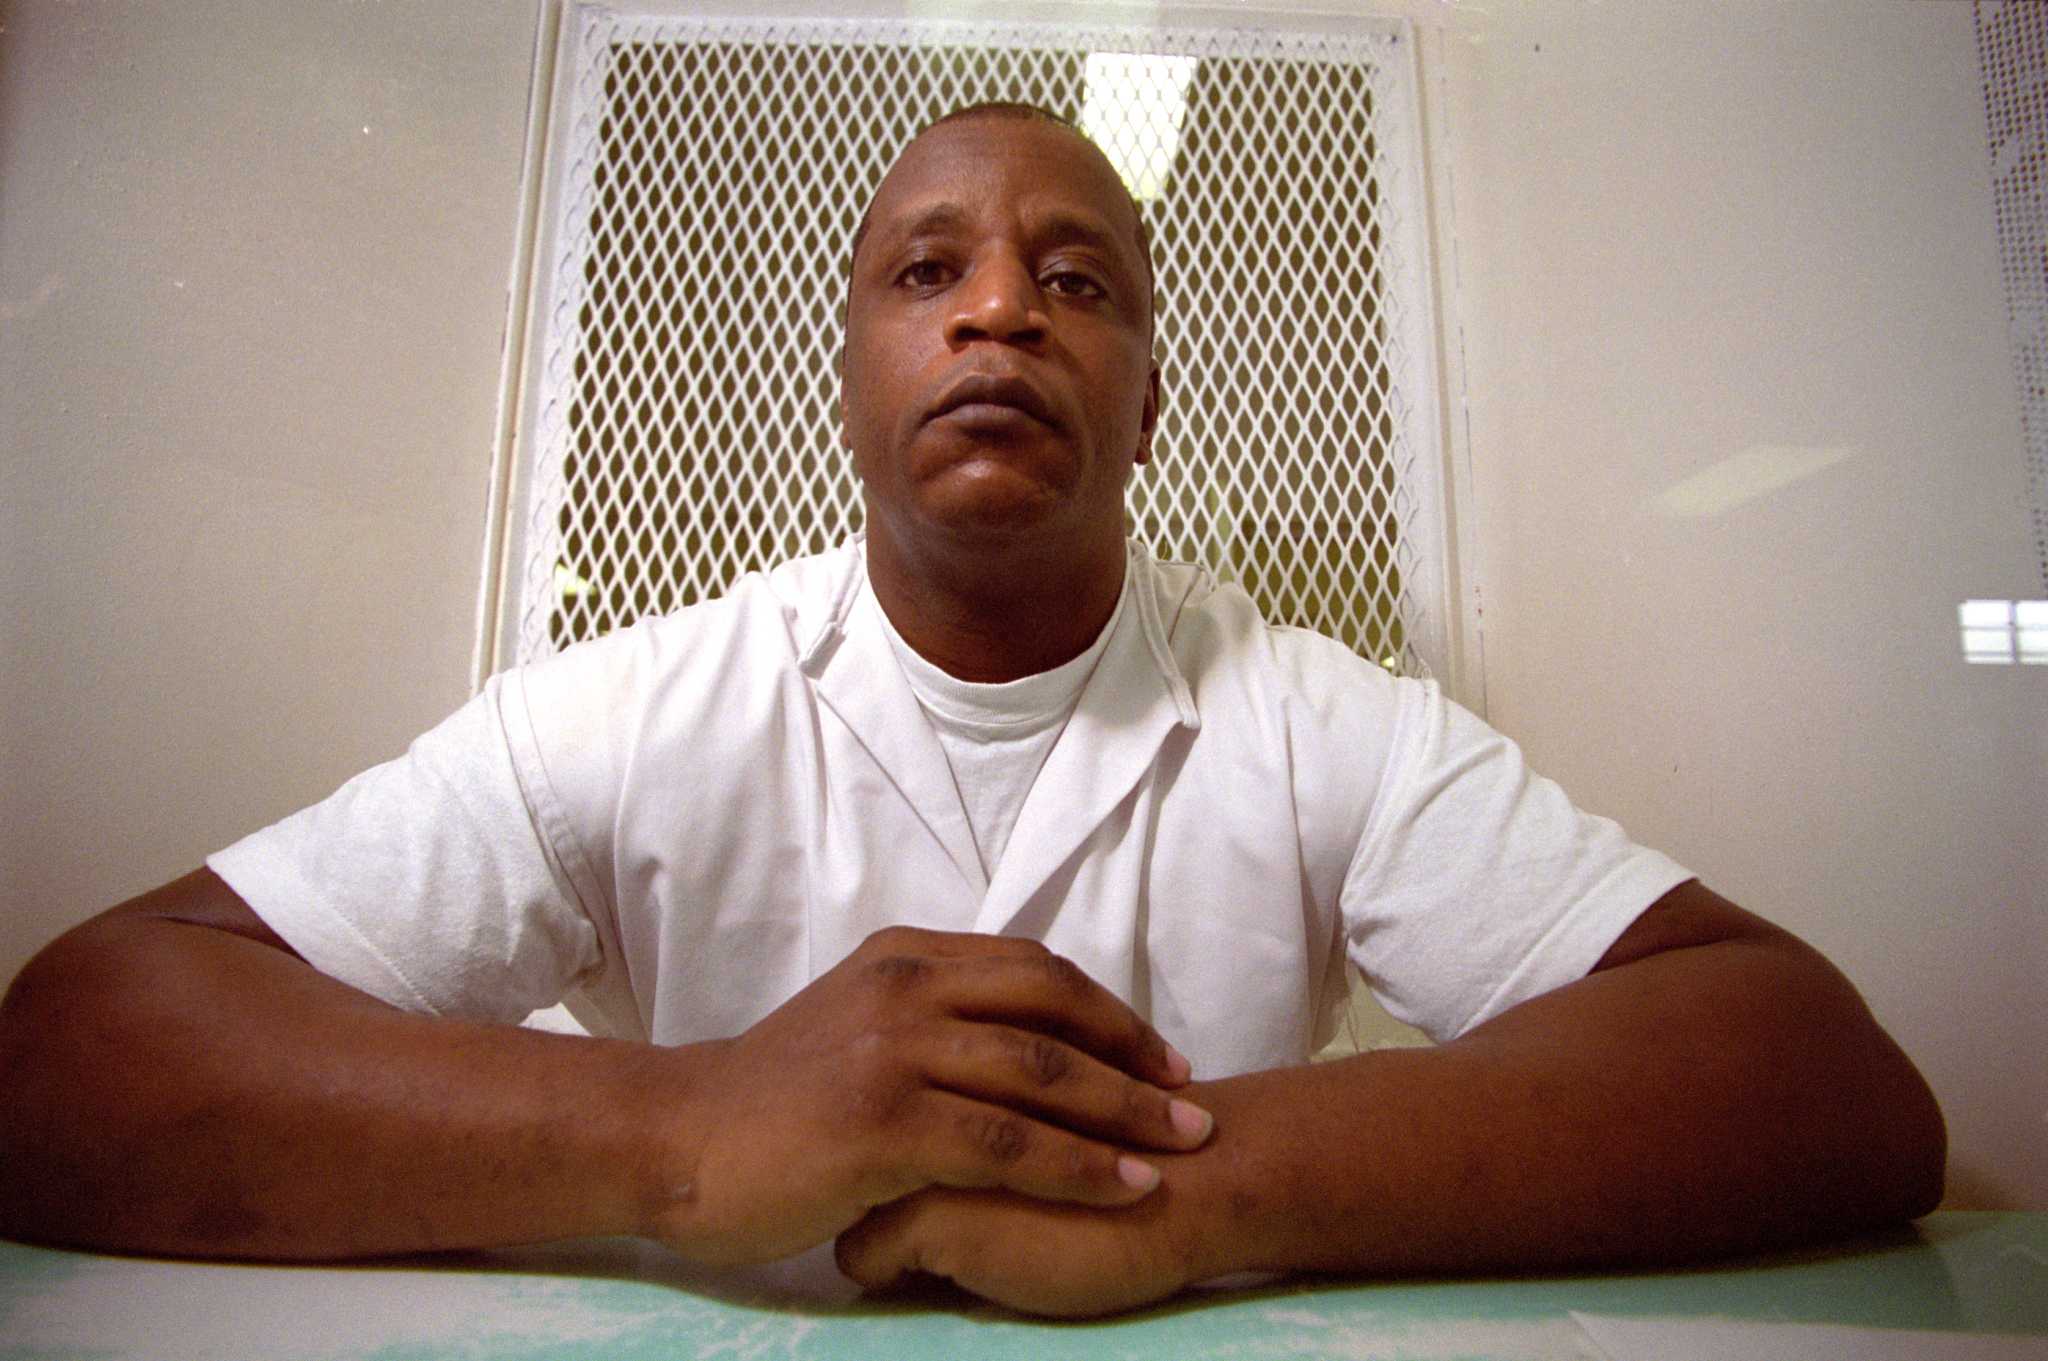 Judge Rejects Appeal From Houston Death Row Prisoner Whose Lawyer Slept During Trial